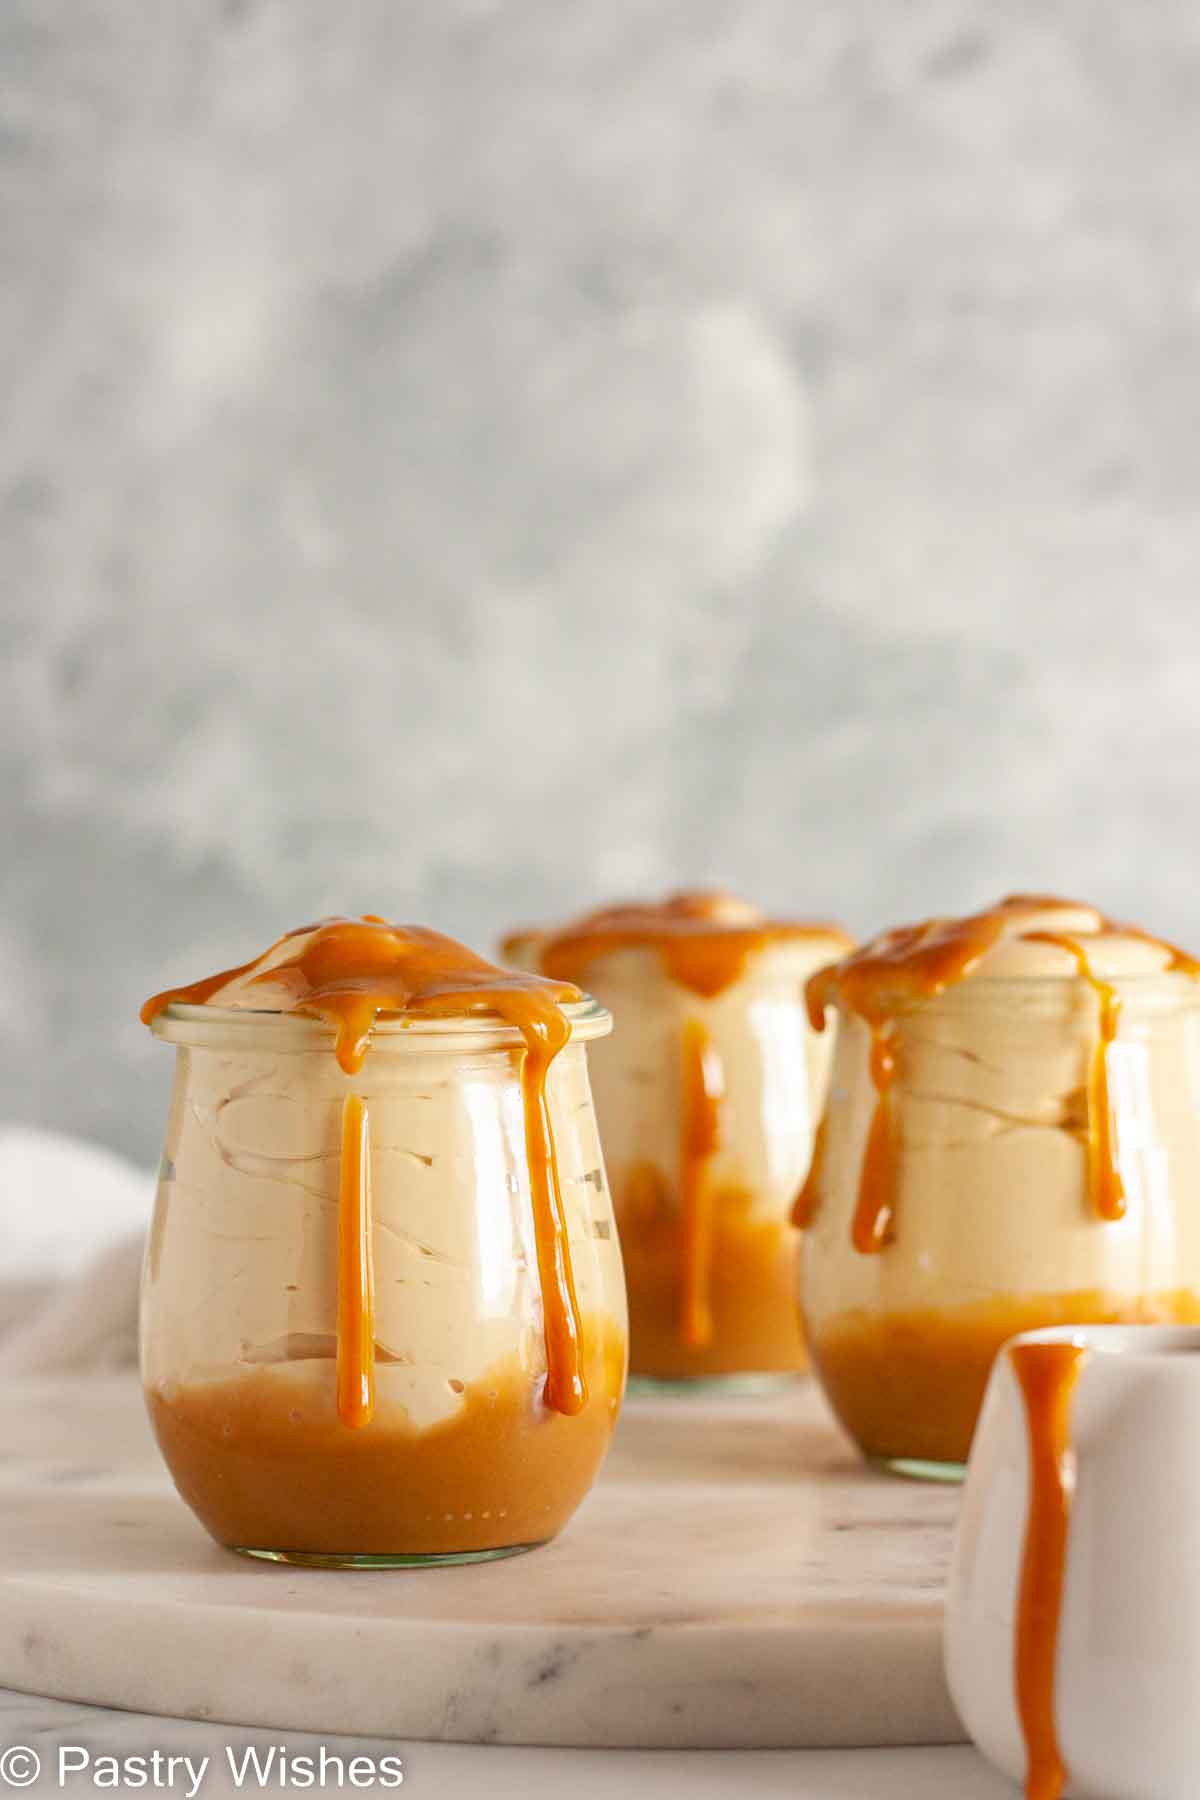 Three serving glasses of Dulce de leche mousse on a white marble surface with dulce de leche dripping on top.